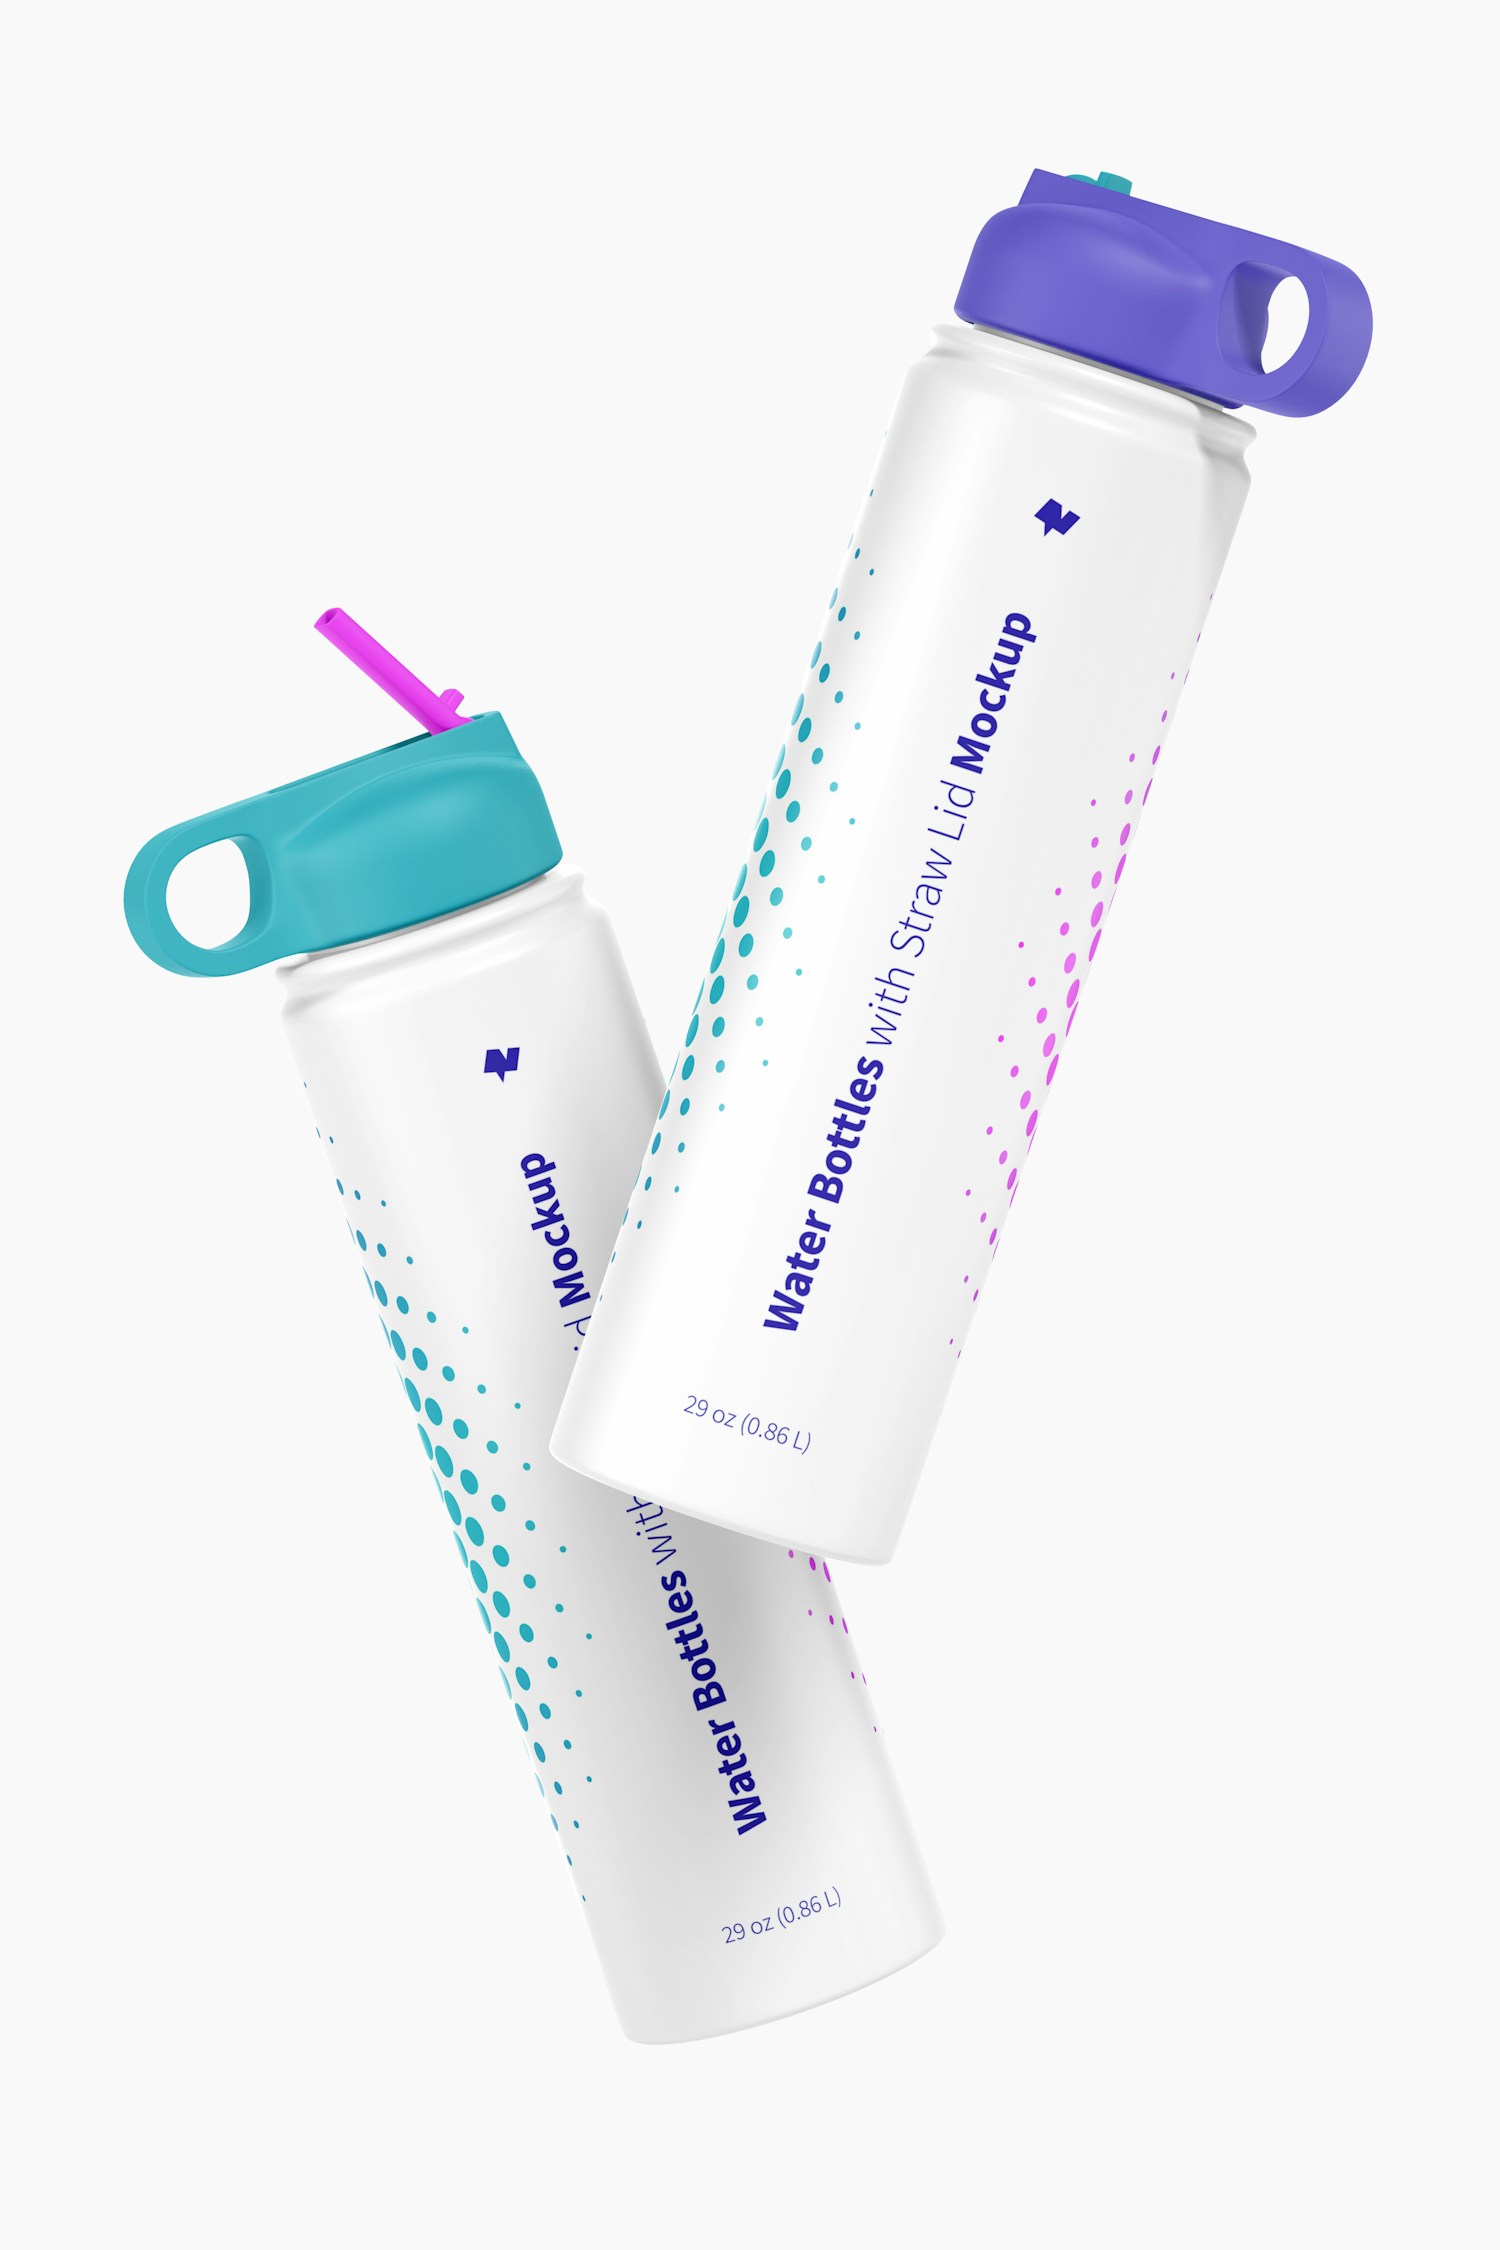 Water Bottles with Straw Lid Mockup, Floating